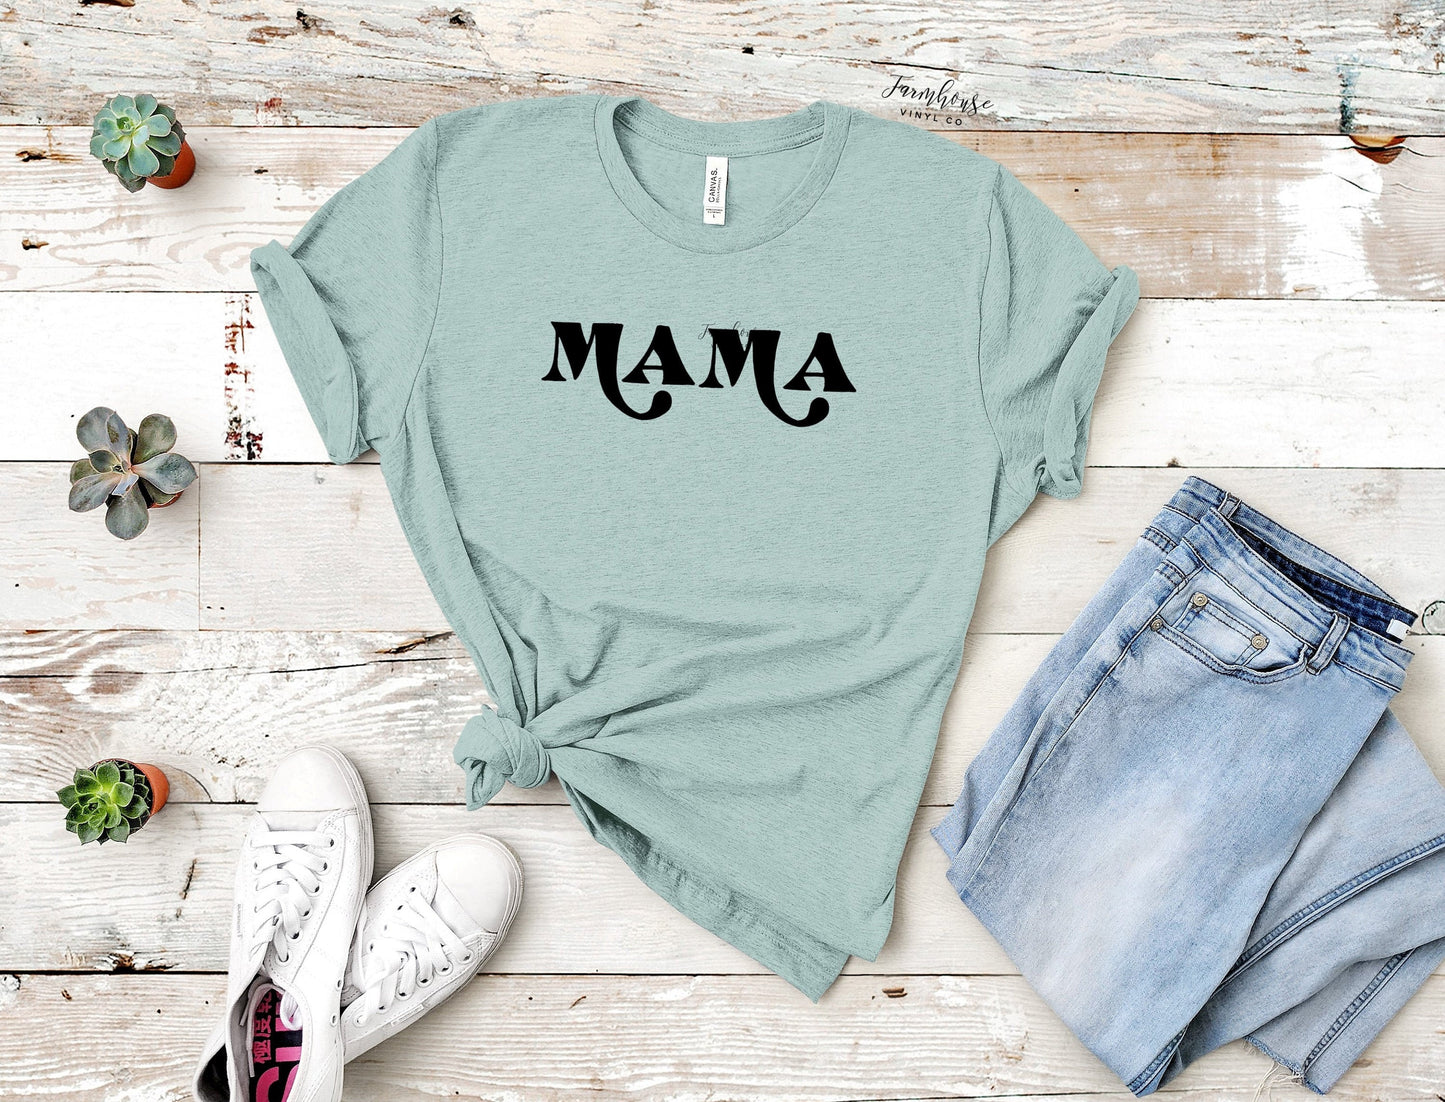 Retro Mama Shirt Mothers Day Gift Gift for Her Mom Shirt Attire for Her Vintage Retro Shirt Womans Tee Shirt - Farmhouse Vinyl Co